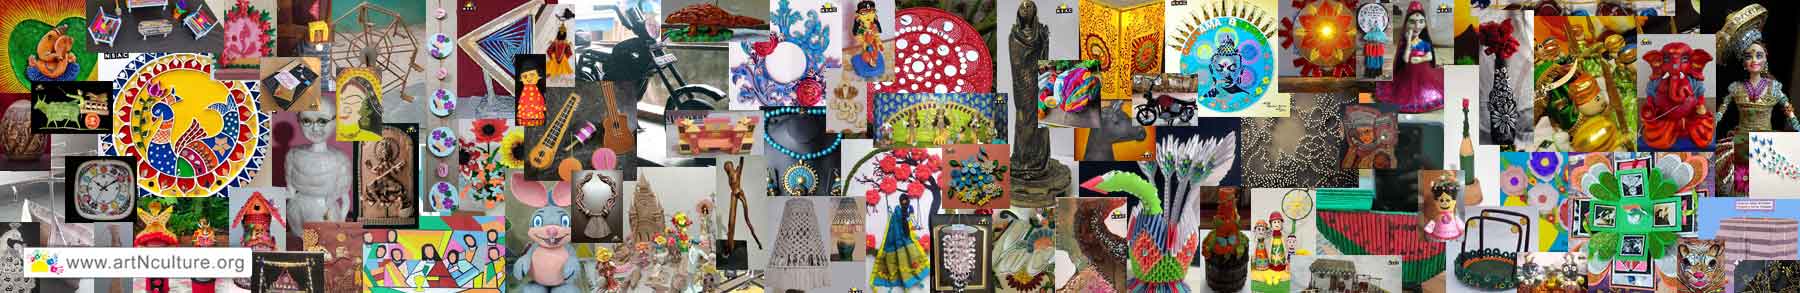 Online All India National Level Craft Competition - Shilp Aakar